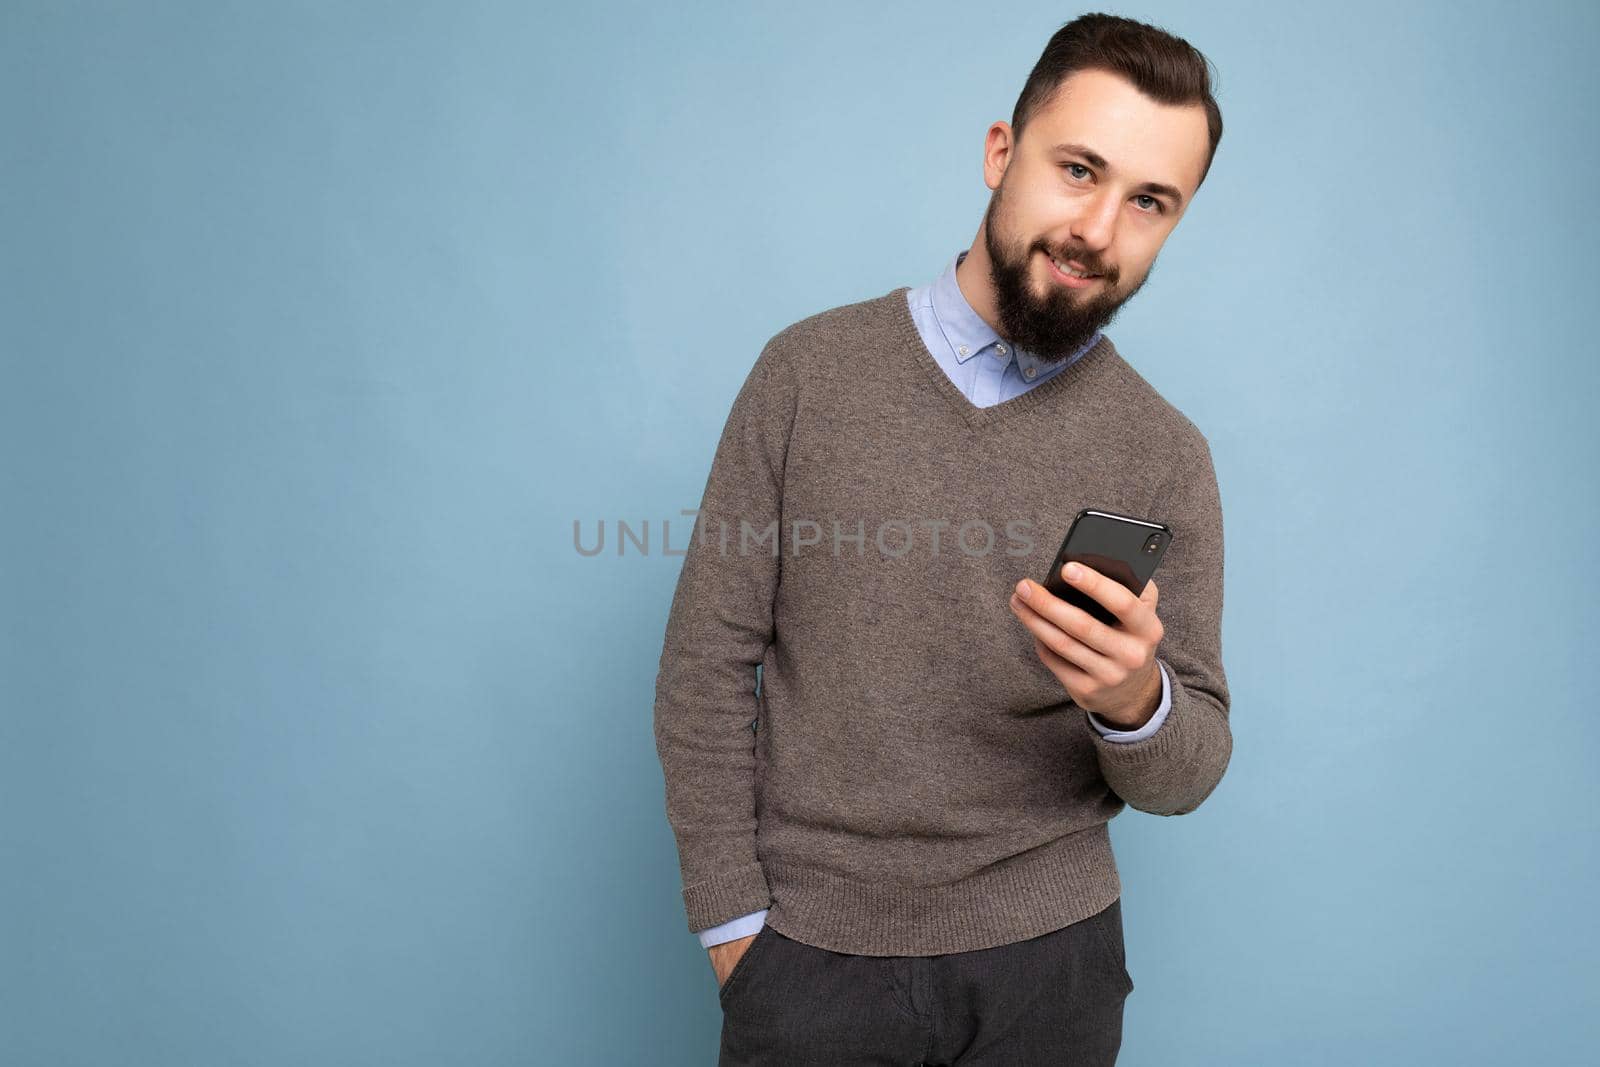 Photo of handsome good looking brunet bearded young man wearing grey sweater and blue shirt isolated on pink background with empty space holding in hand and using mobile phone communicating online looking at camera.